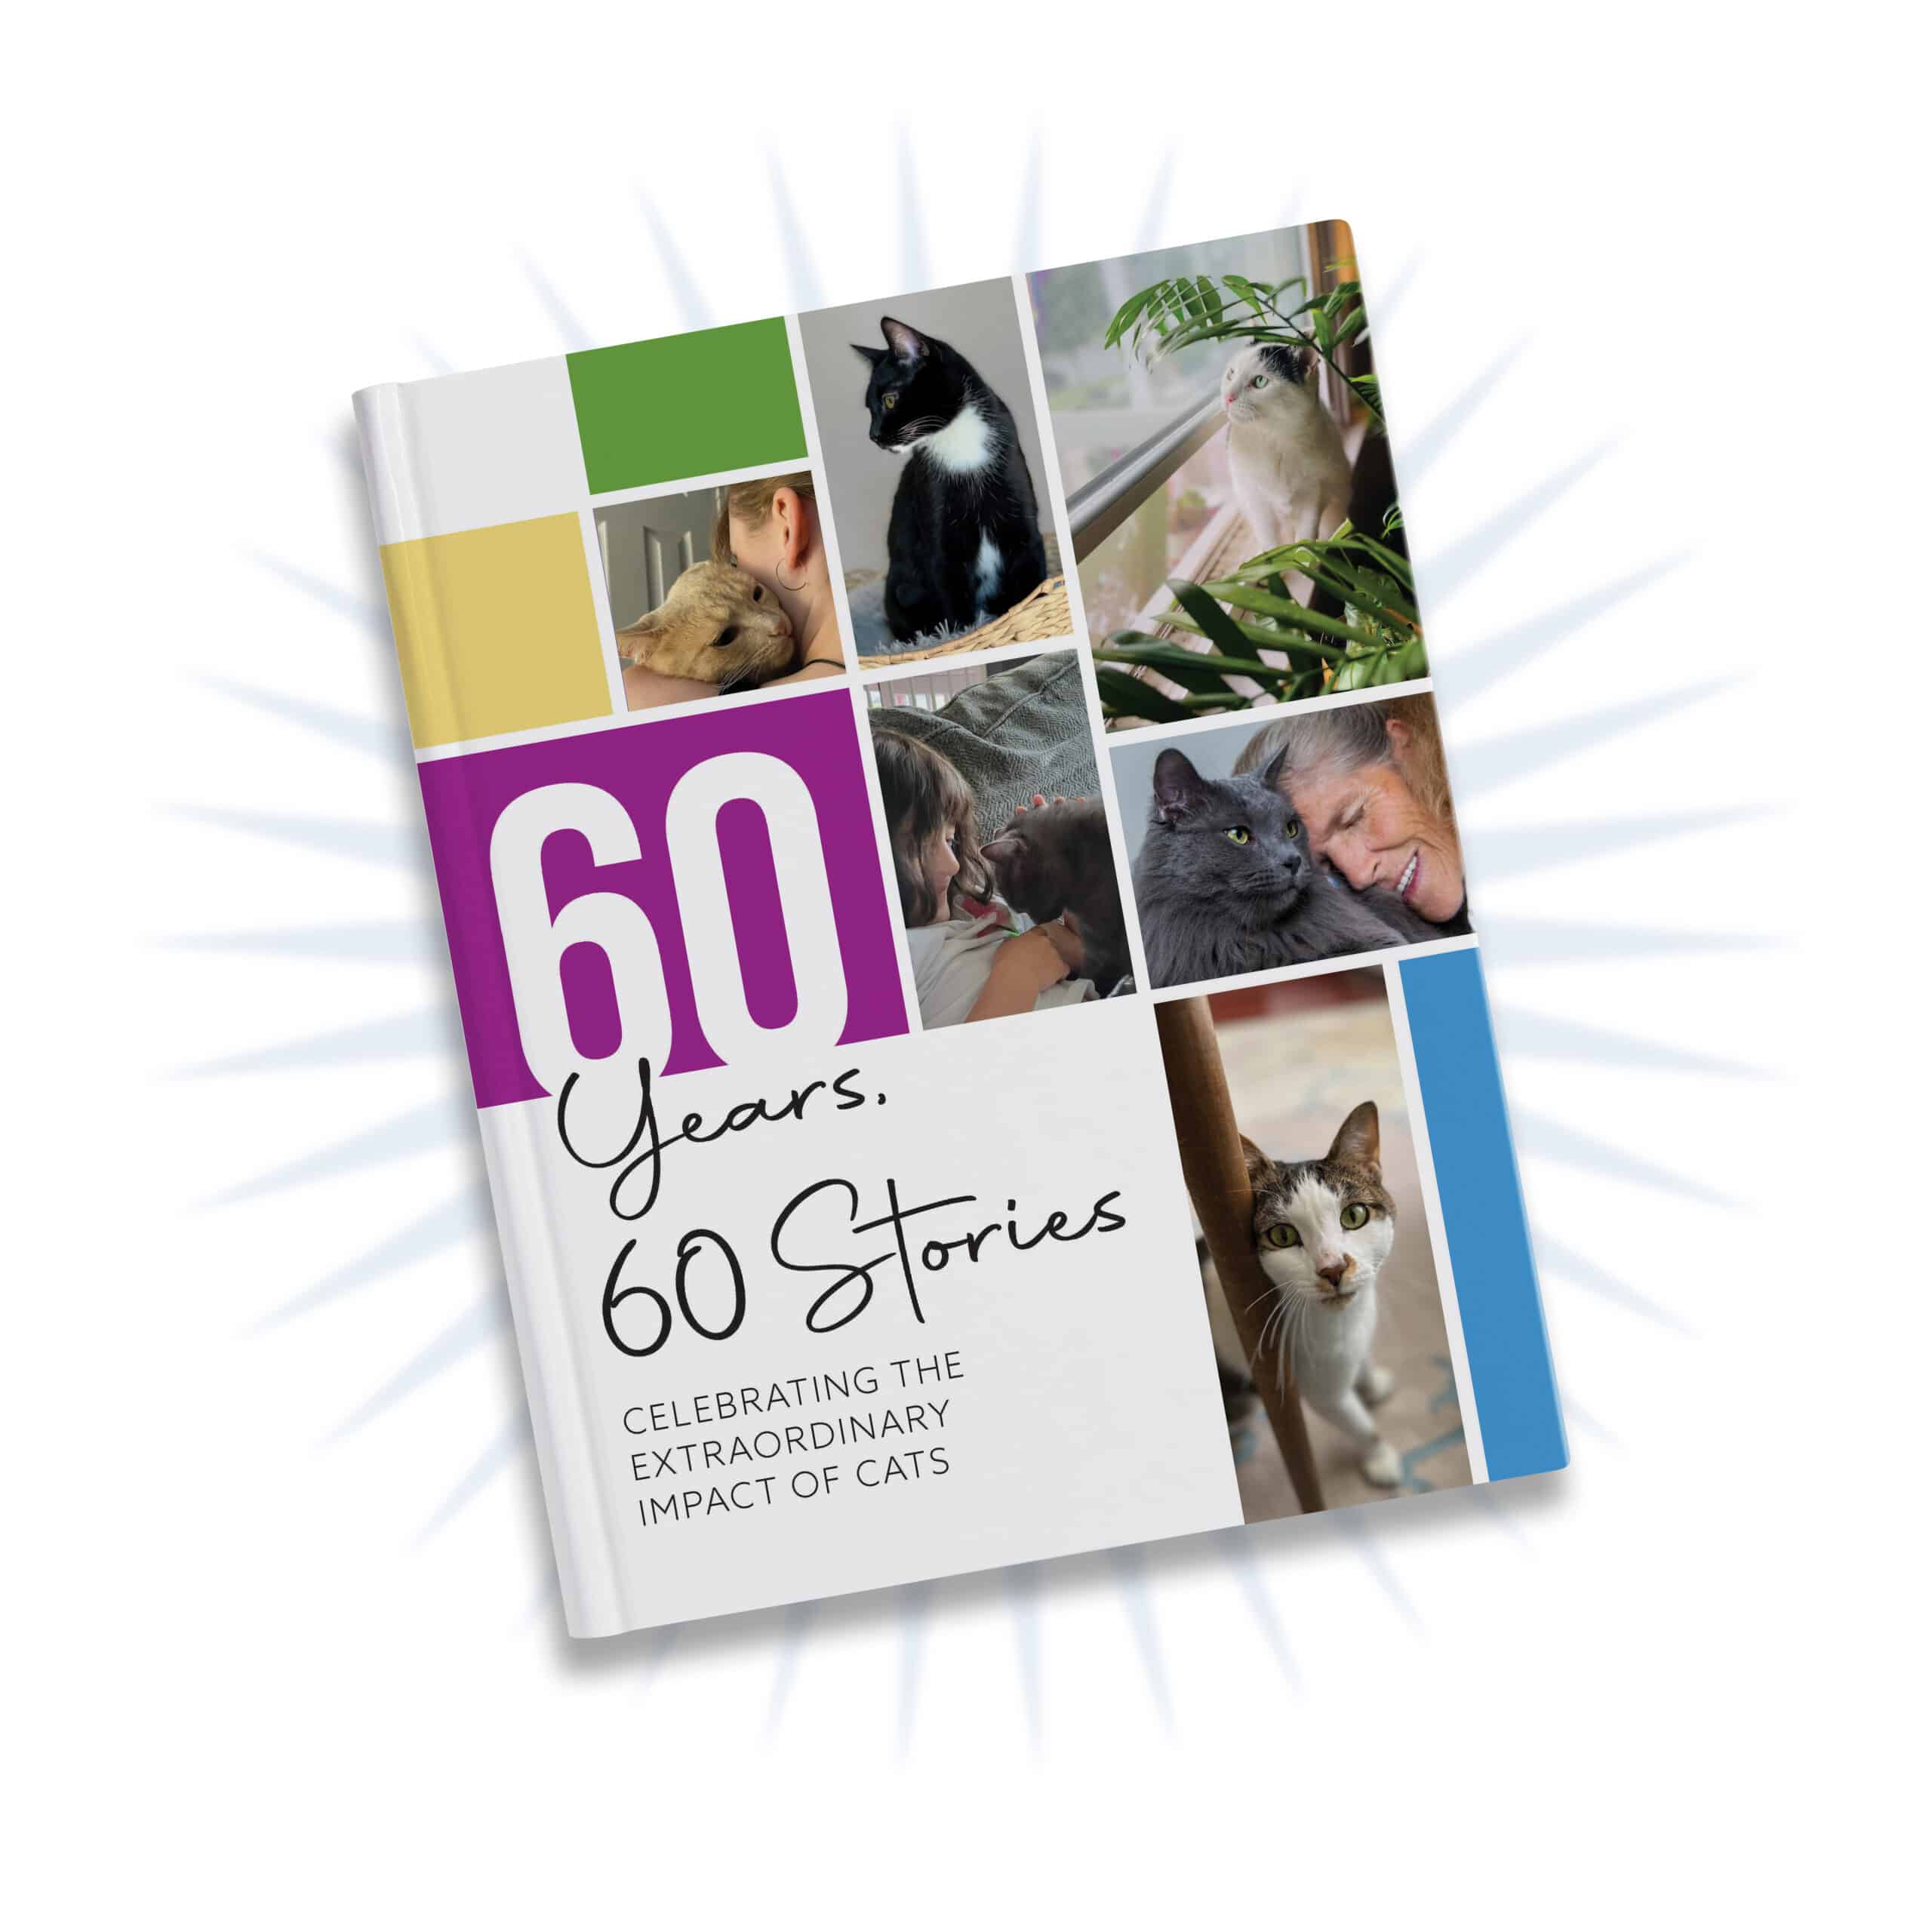 Cat Chow 60th anniversary book cover.